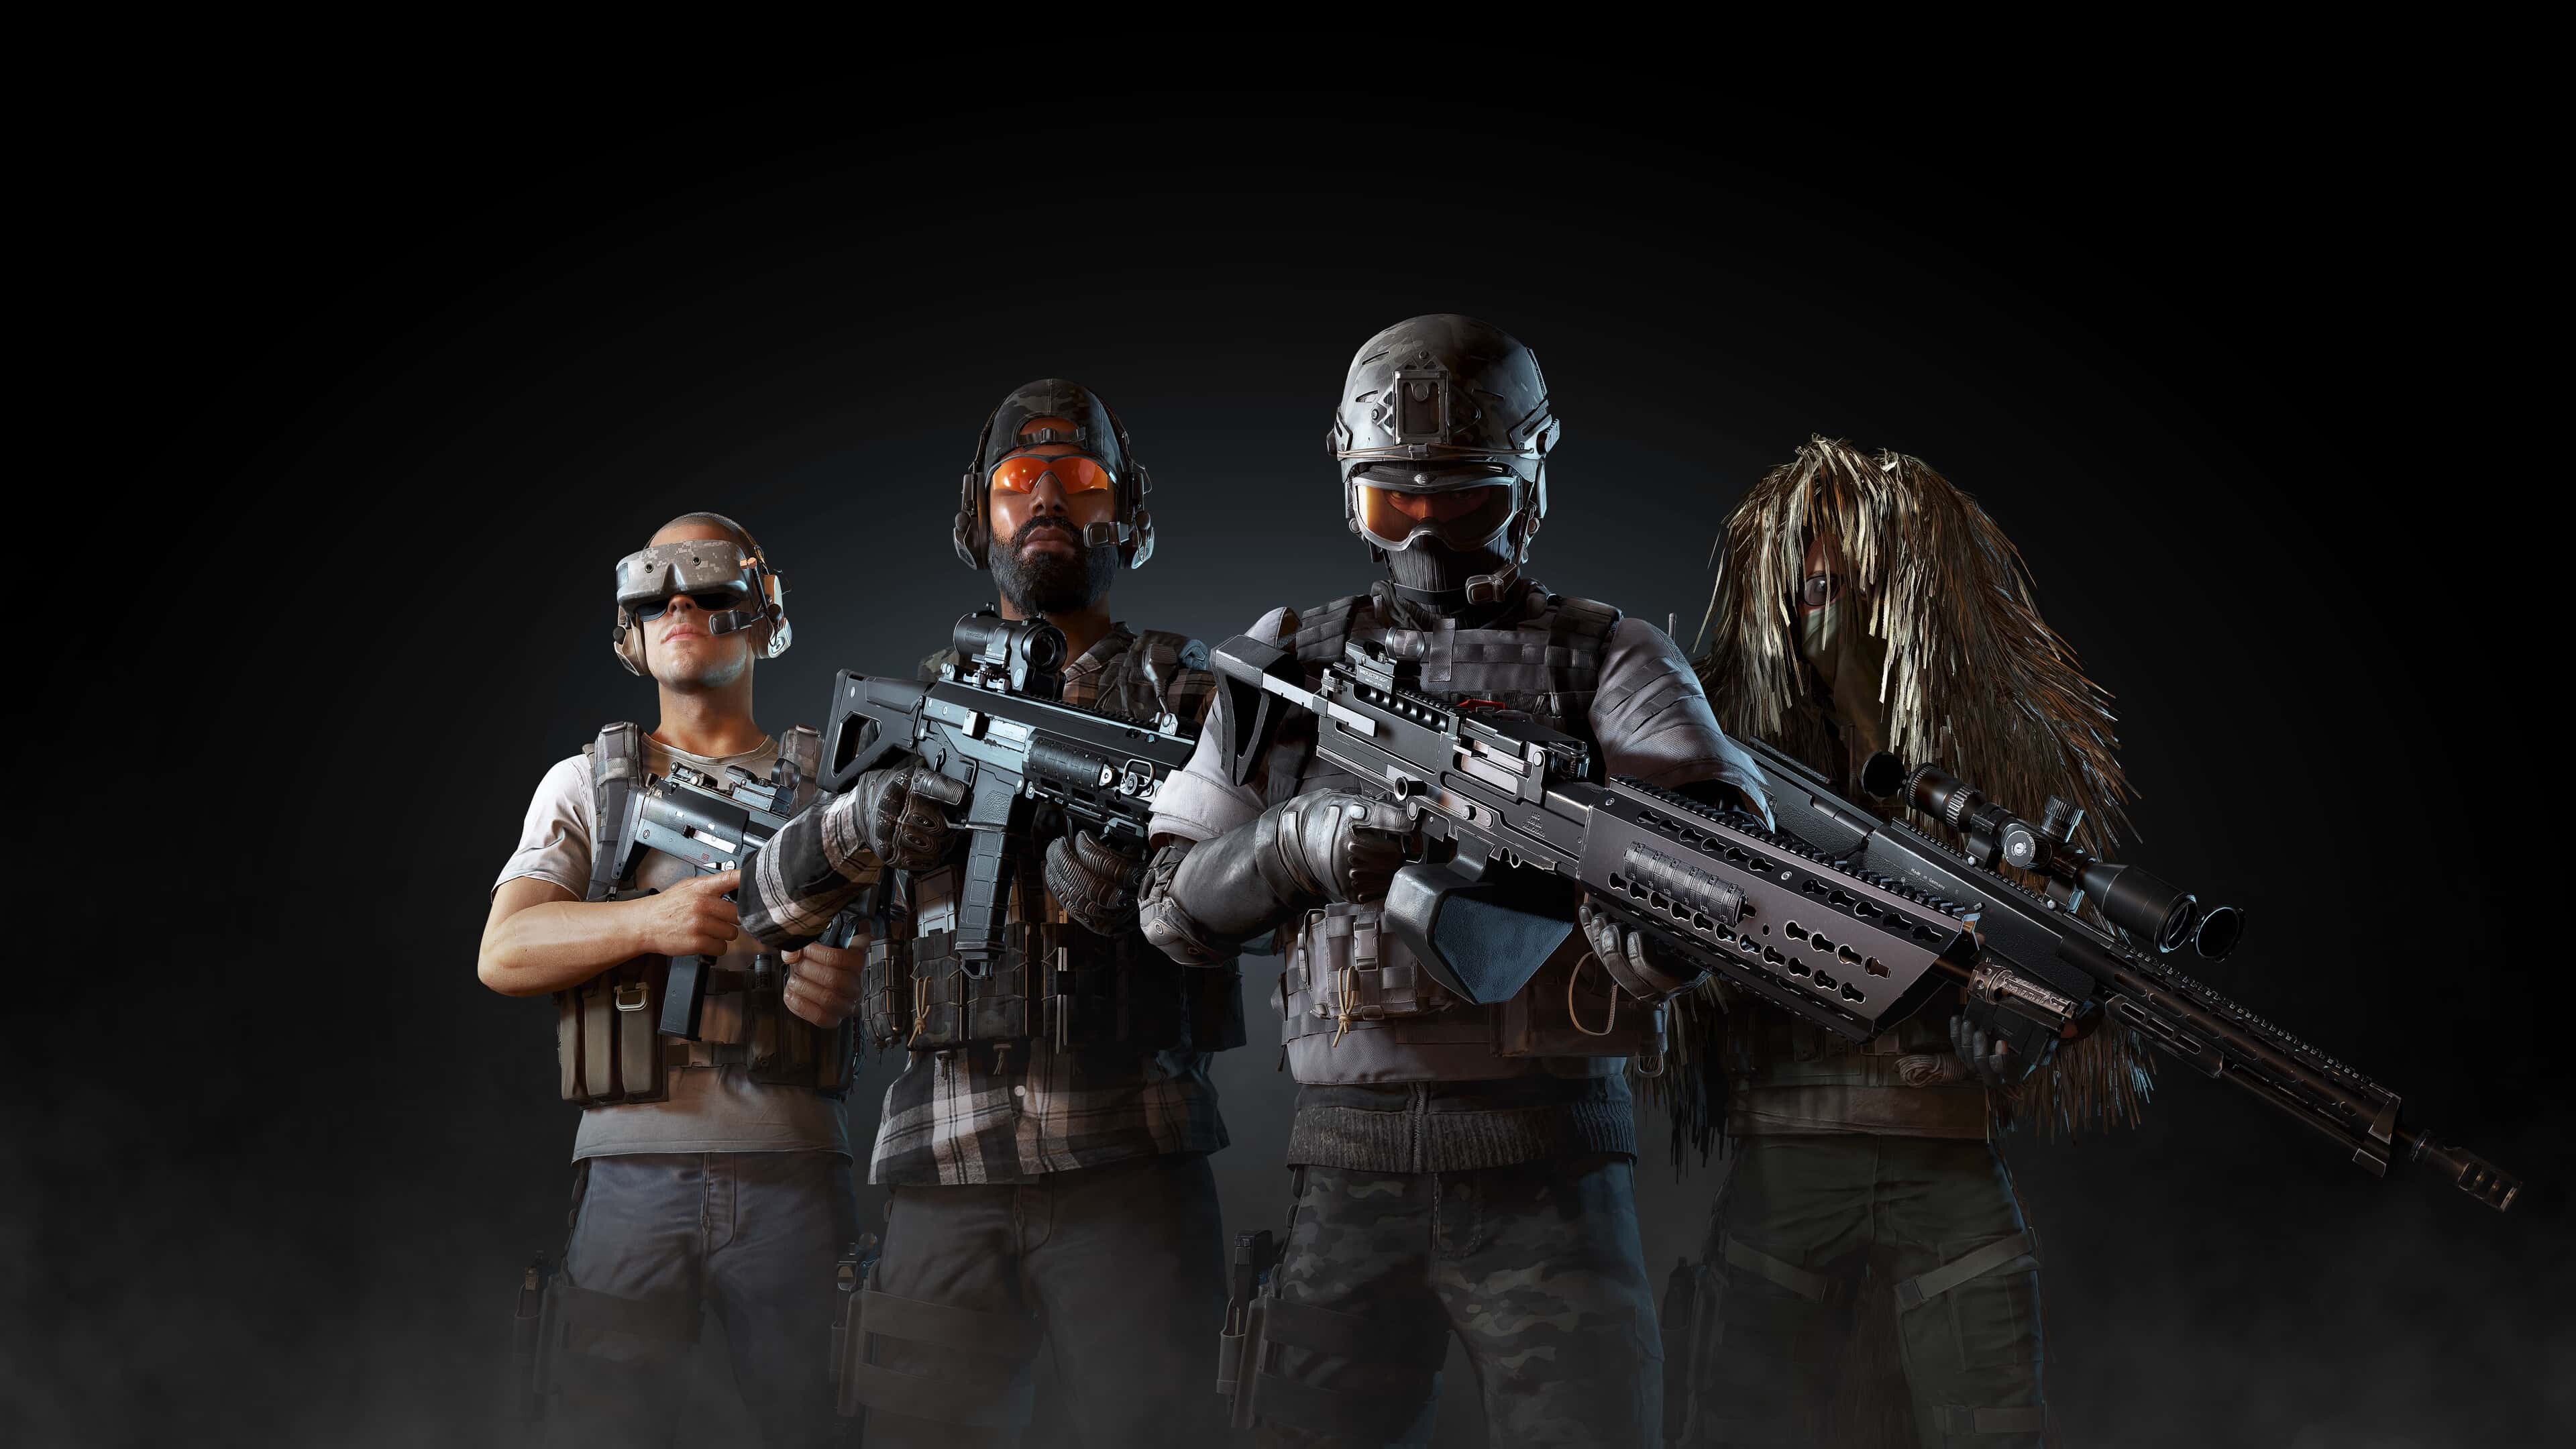 Ghost Recon: Wildlands: Team leader "Nomad", vehicle and assault specialist "Midas", tactical engineer "Holt", and a sniper "Weaver". 3840x2160 4K Background.